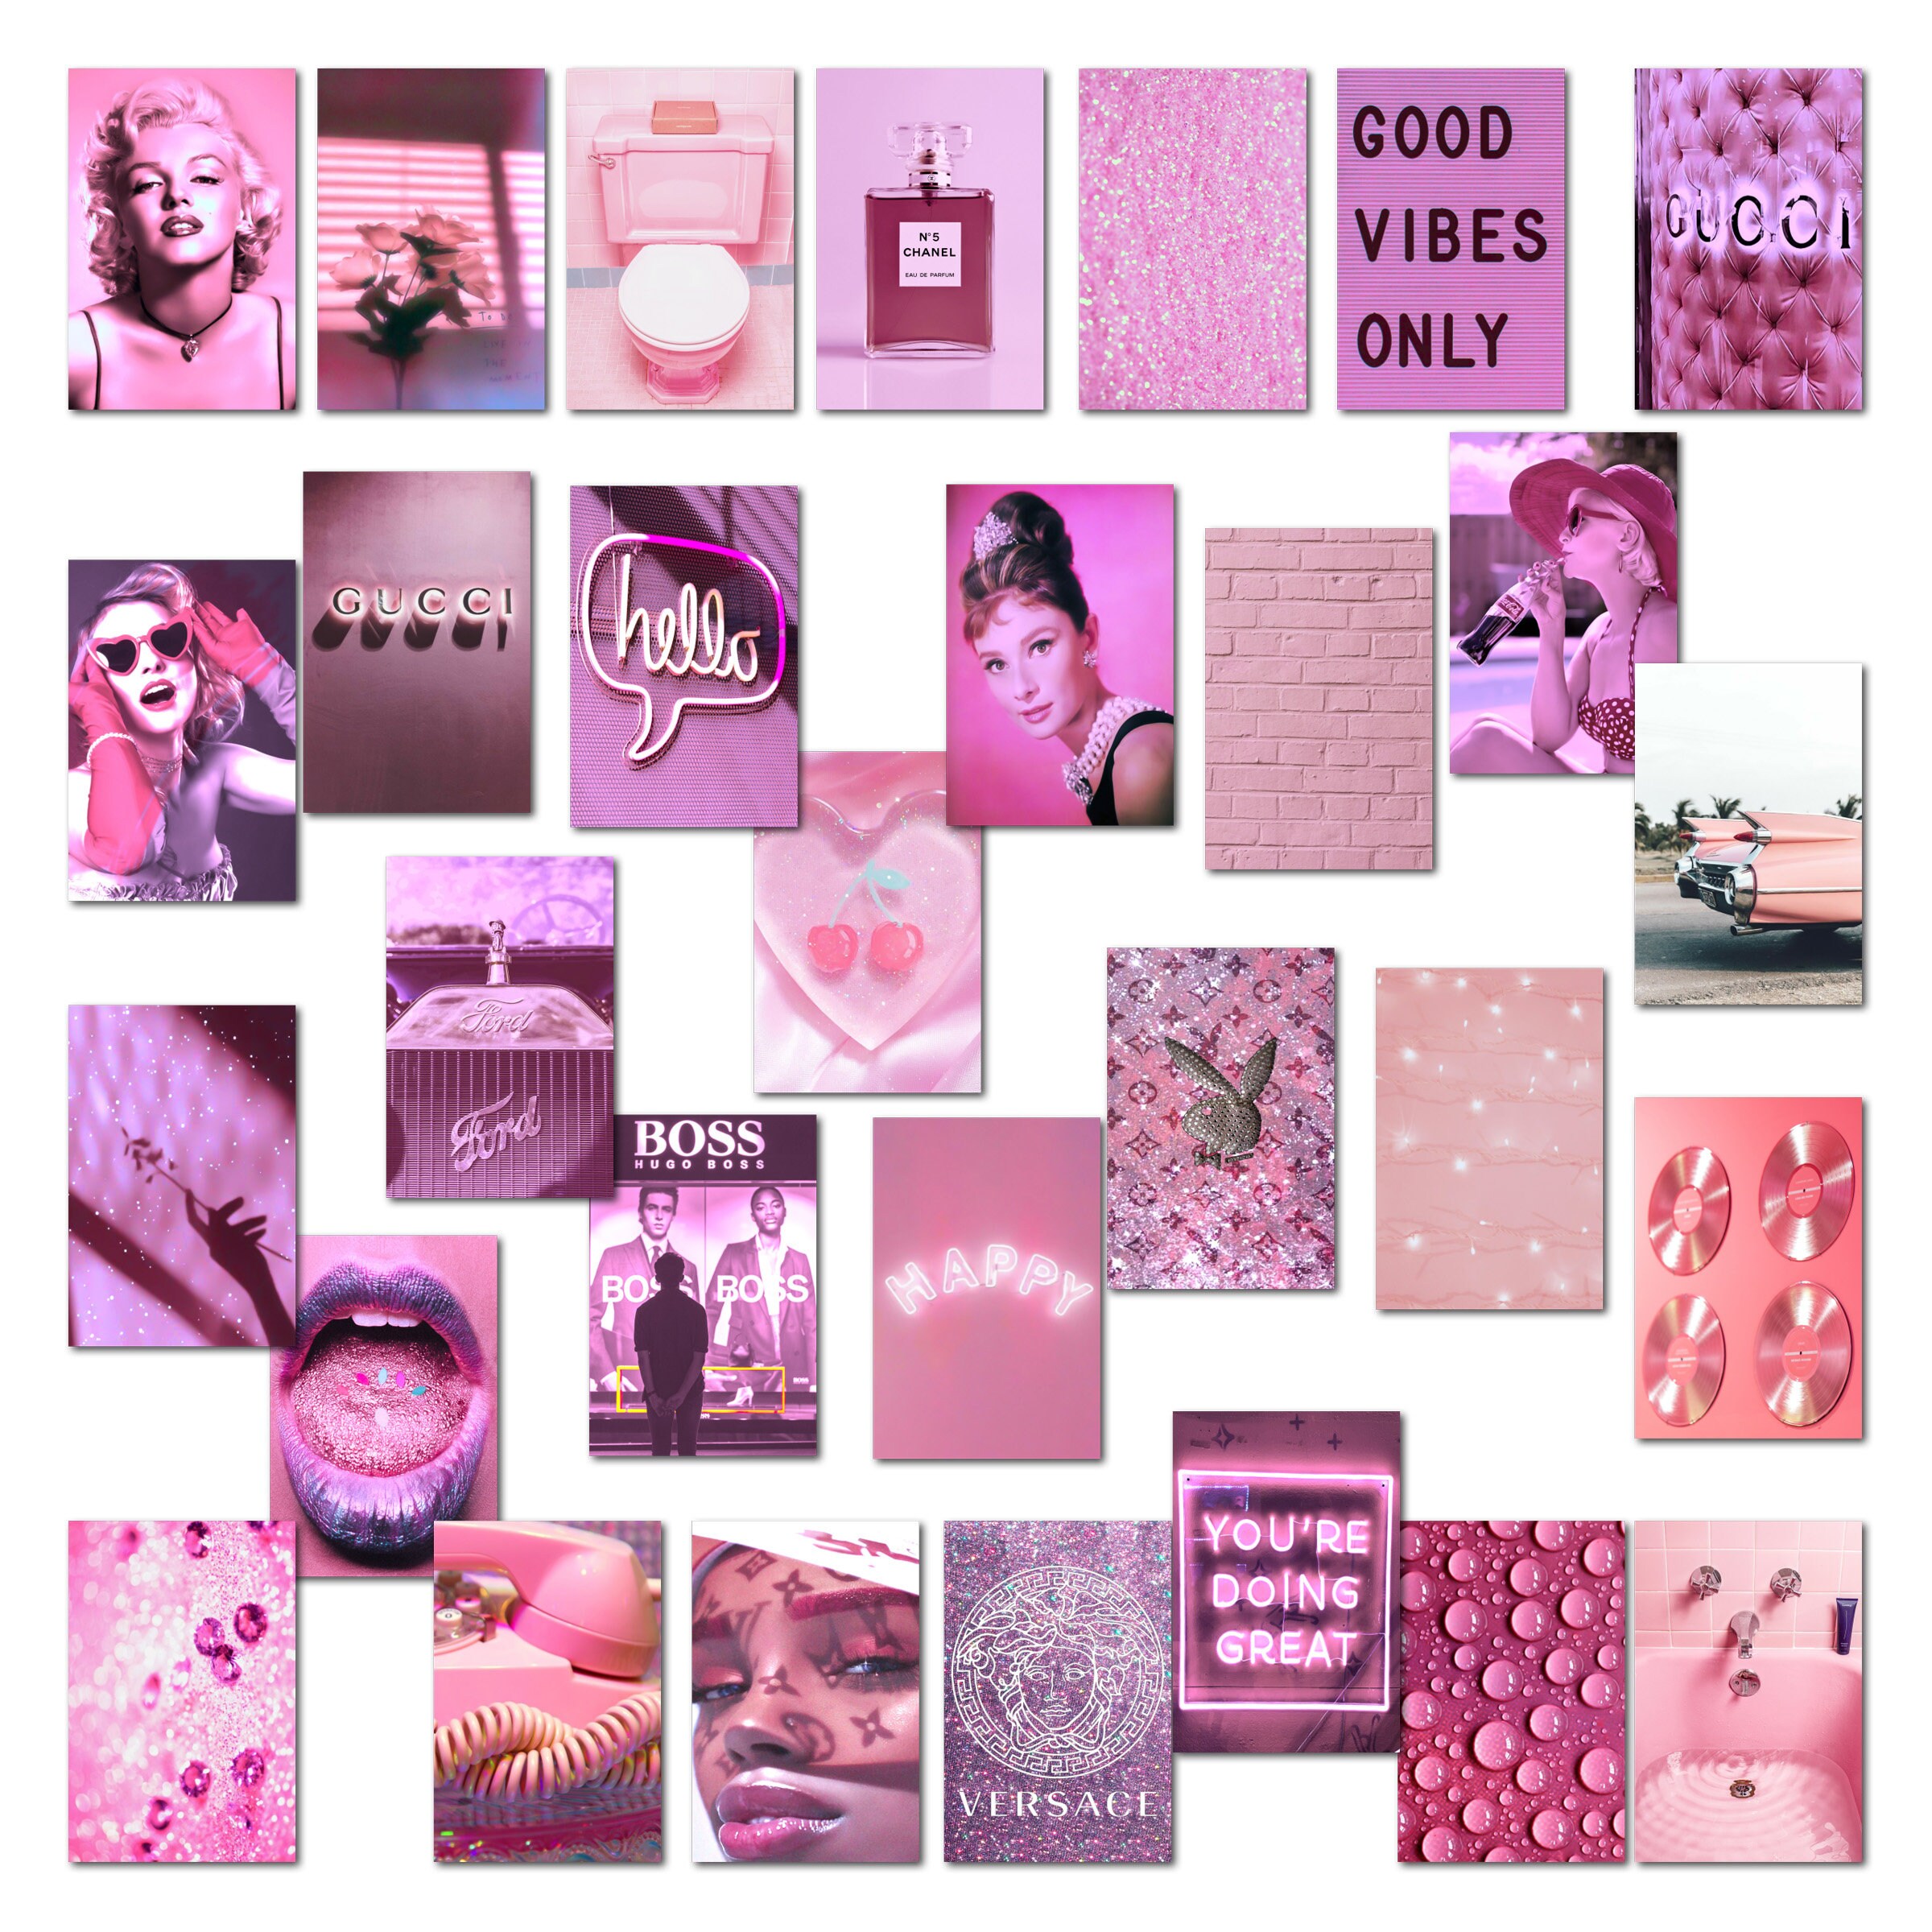 Boujee Pink Aesthetic Wall Collage Kit Pink Wall Collage | Etsy